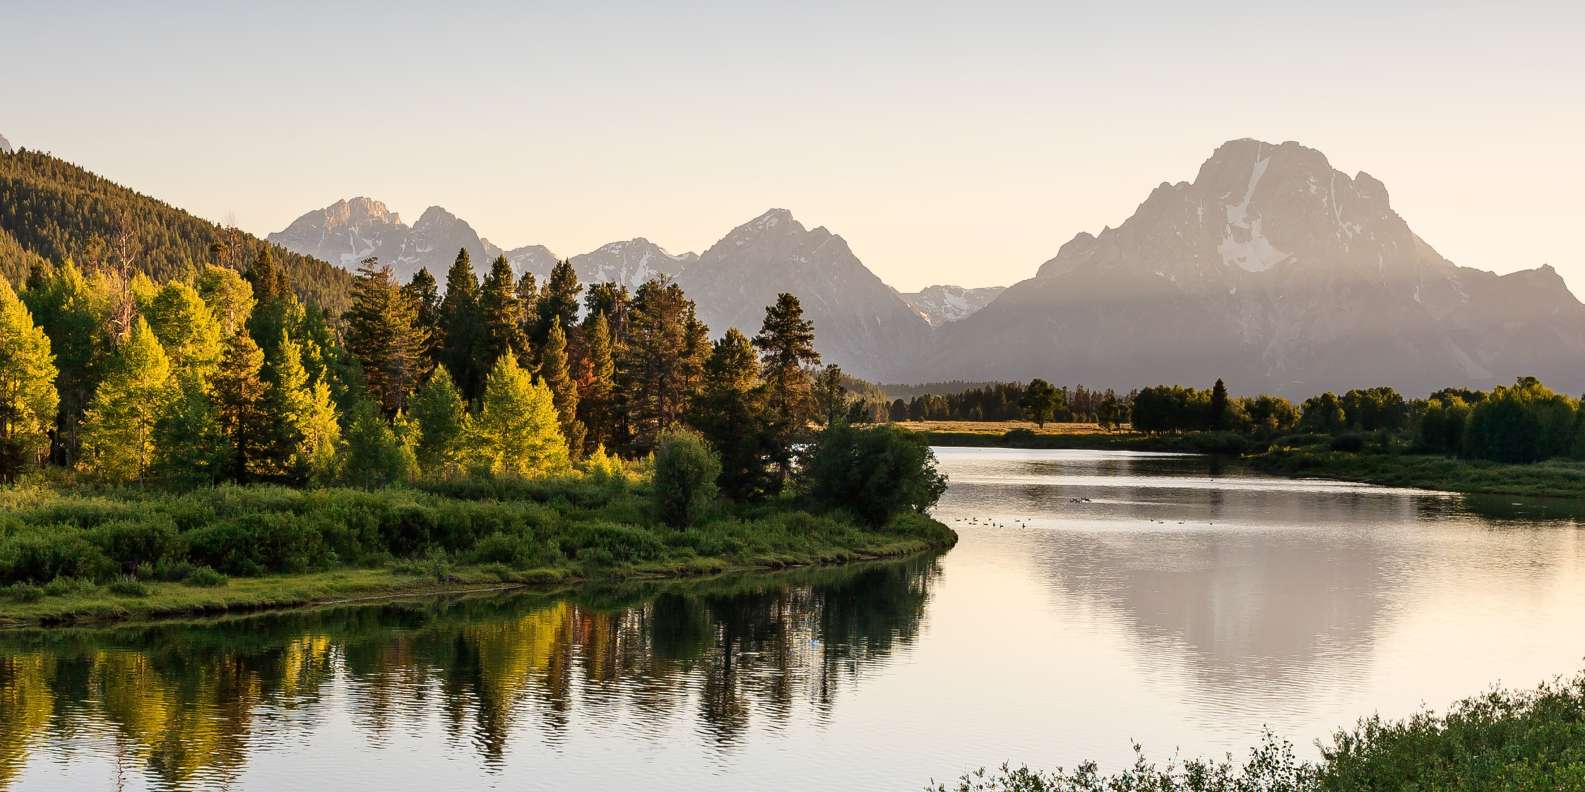 Grand Teton National Park, Wyoming - Book Tickets & Tours | GetYourGuide